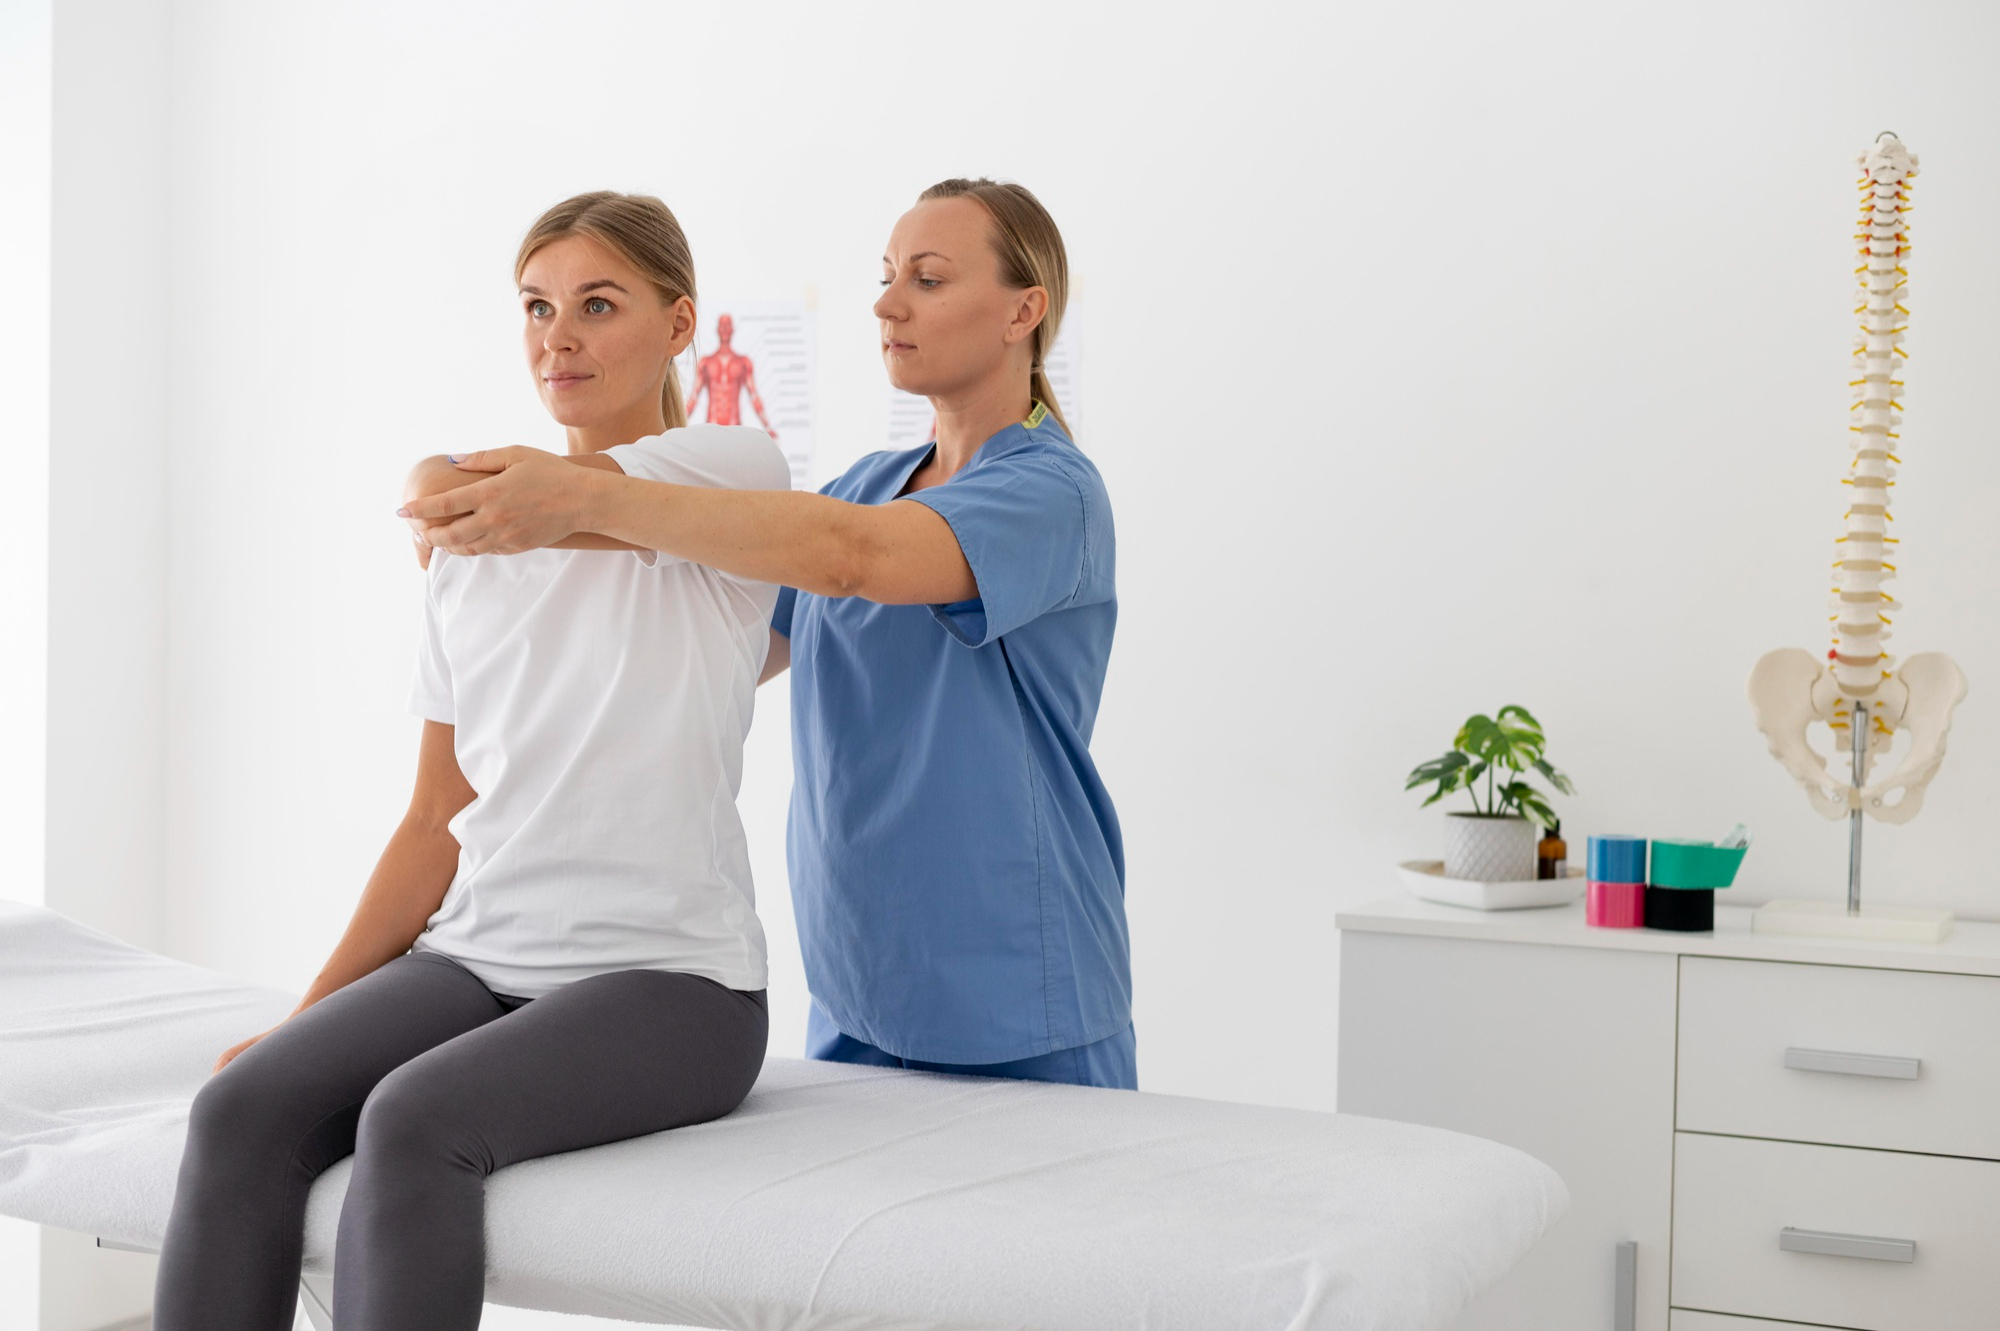 physiotherapist-helping-female-patient-her-clinic